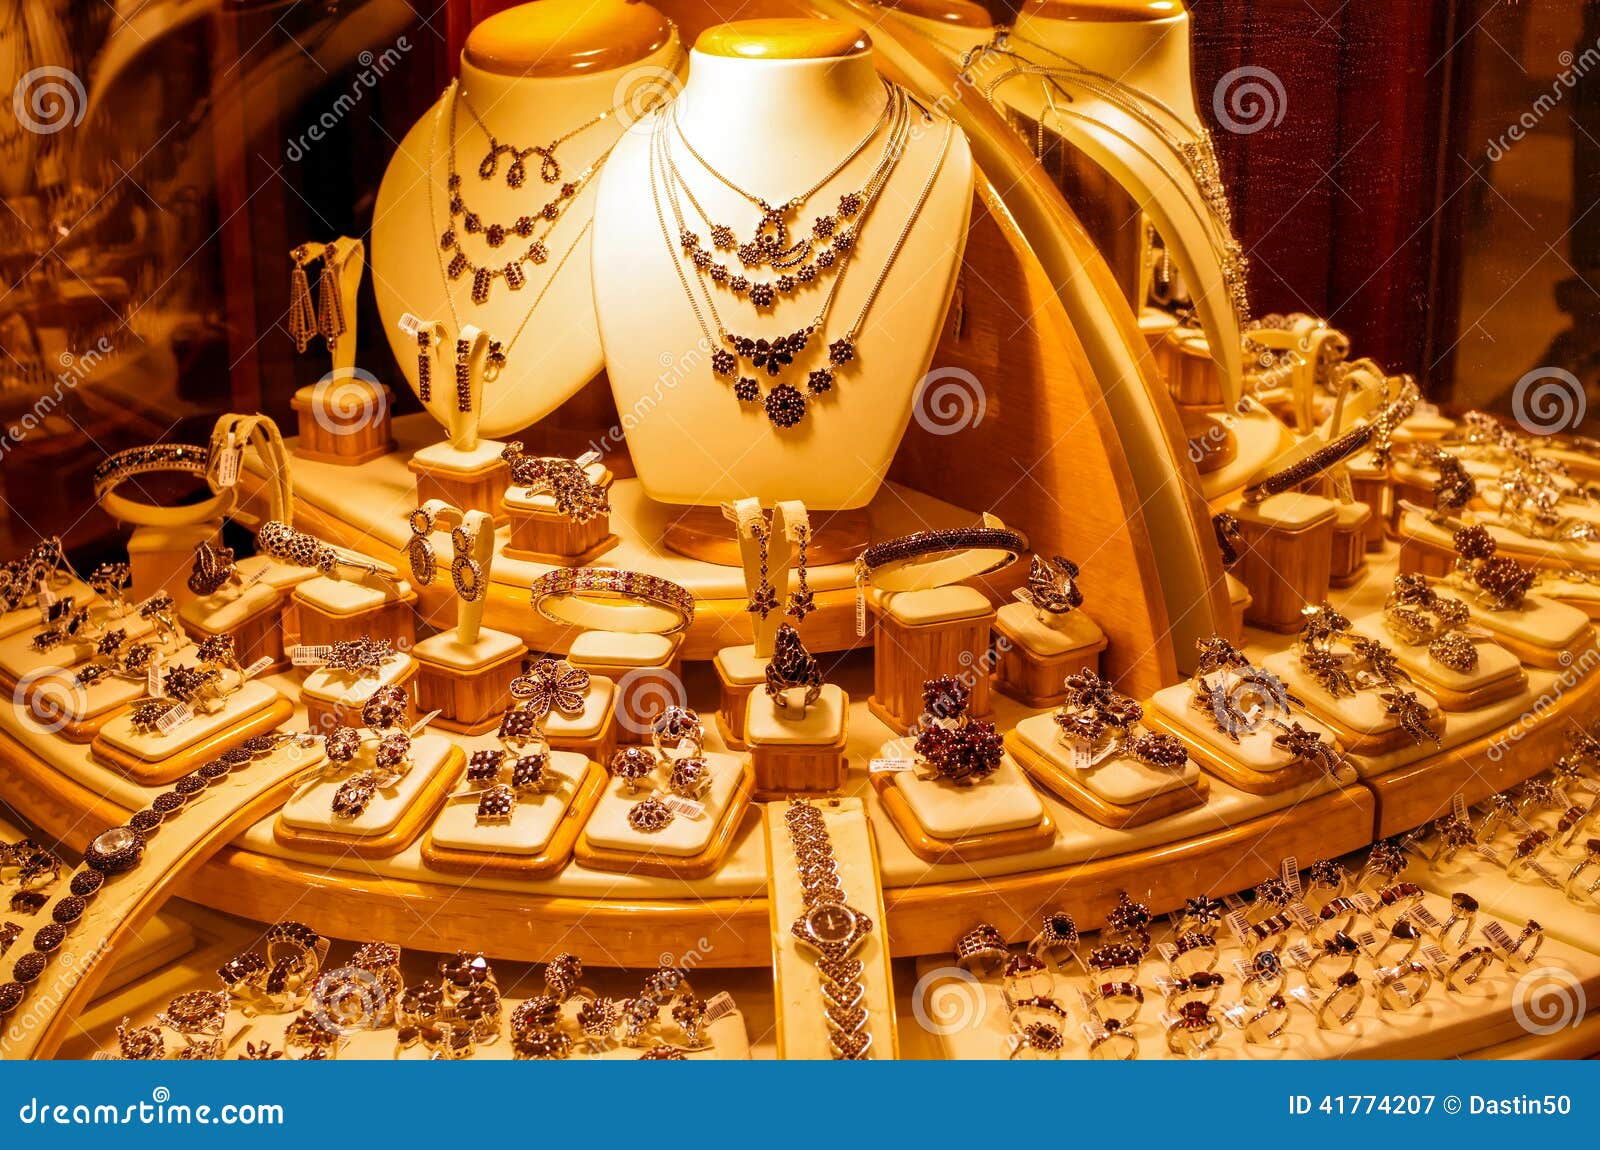 Gold Jewellery In A Shop Window Stock Photo Image 41774207